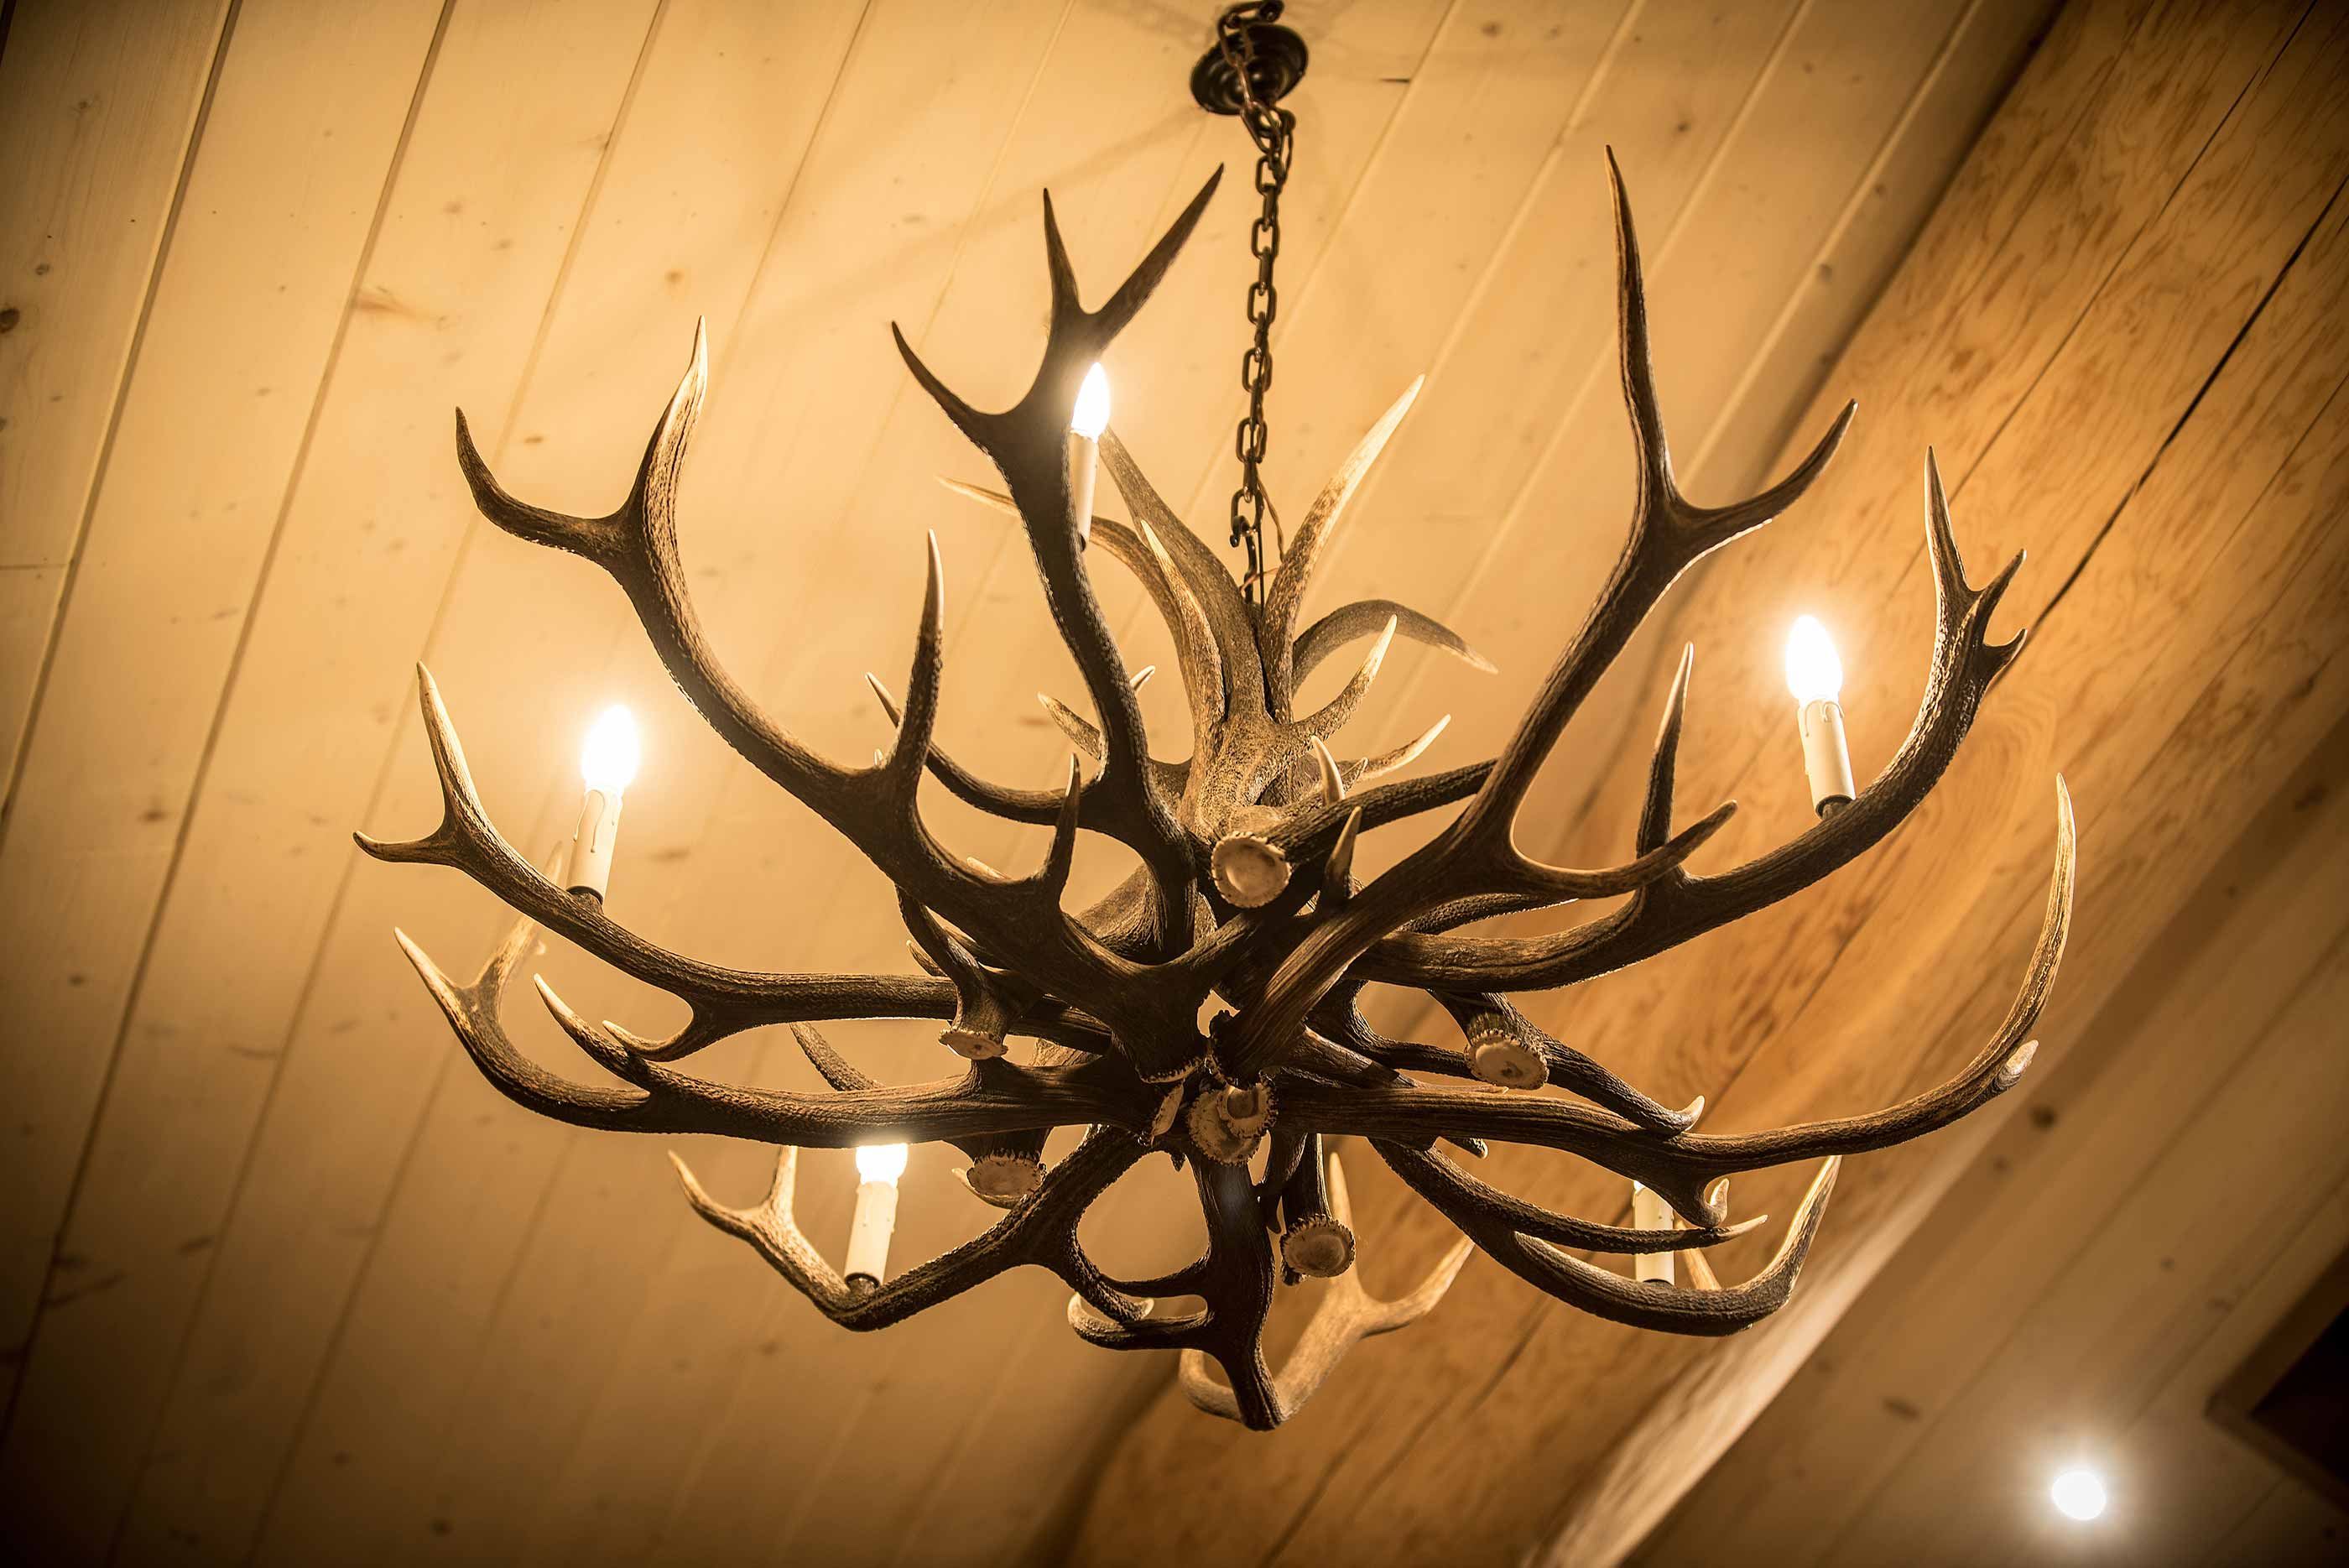 How to Make an Antler Chandelier Step by Step | Eagle Brae